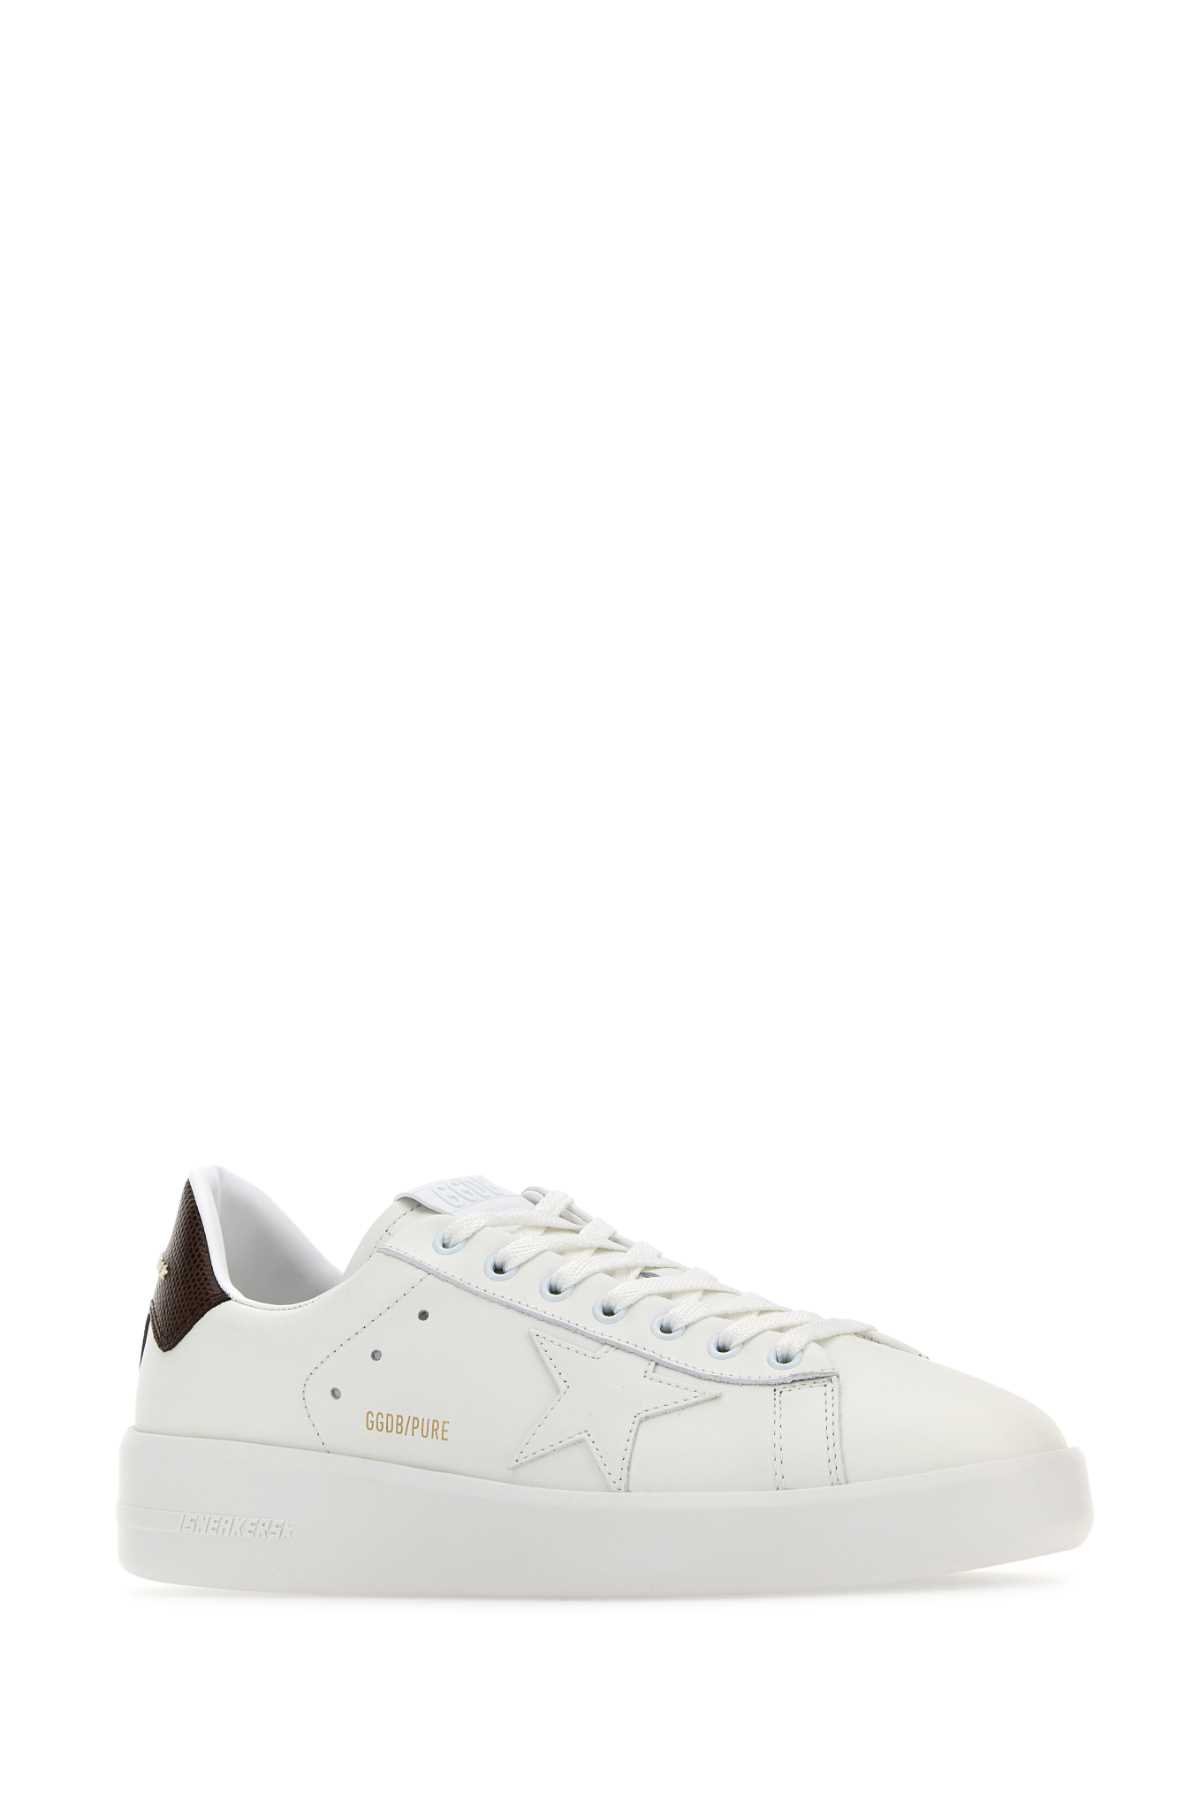 GOLDEN GOOSE WHITE LEATHER PURE NEW SNEAKERS